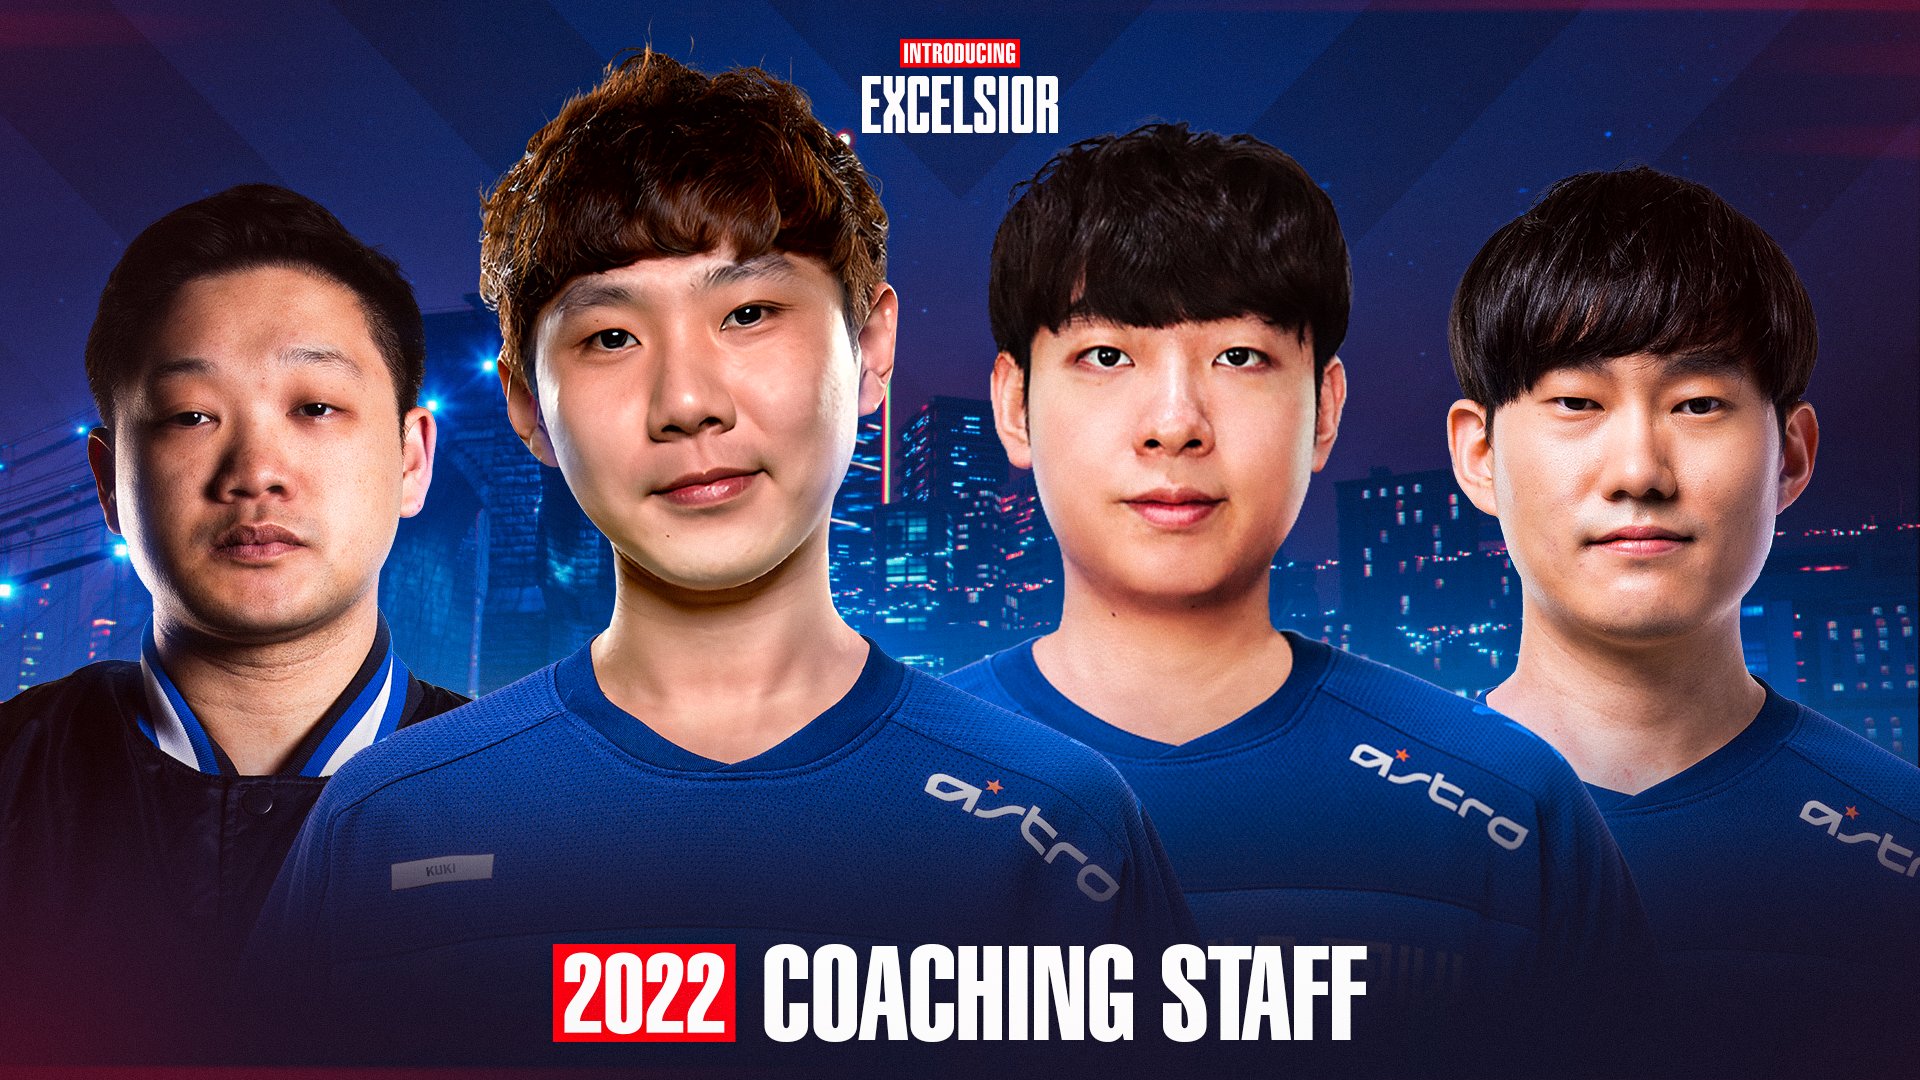 The New York Excelsior's 2022 coaching staff